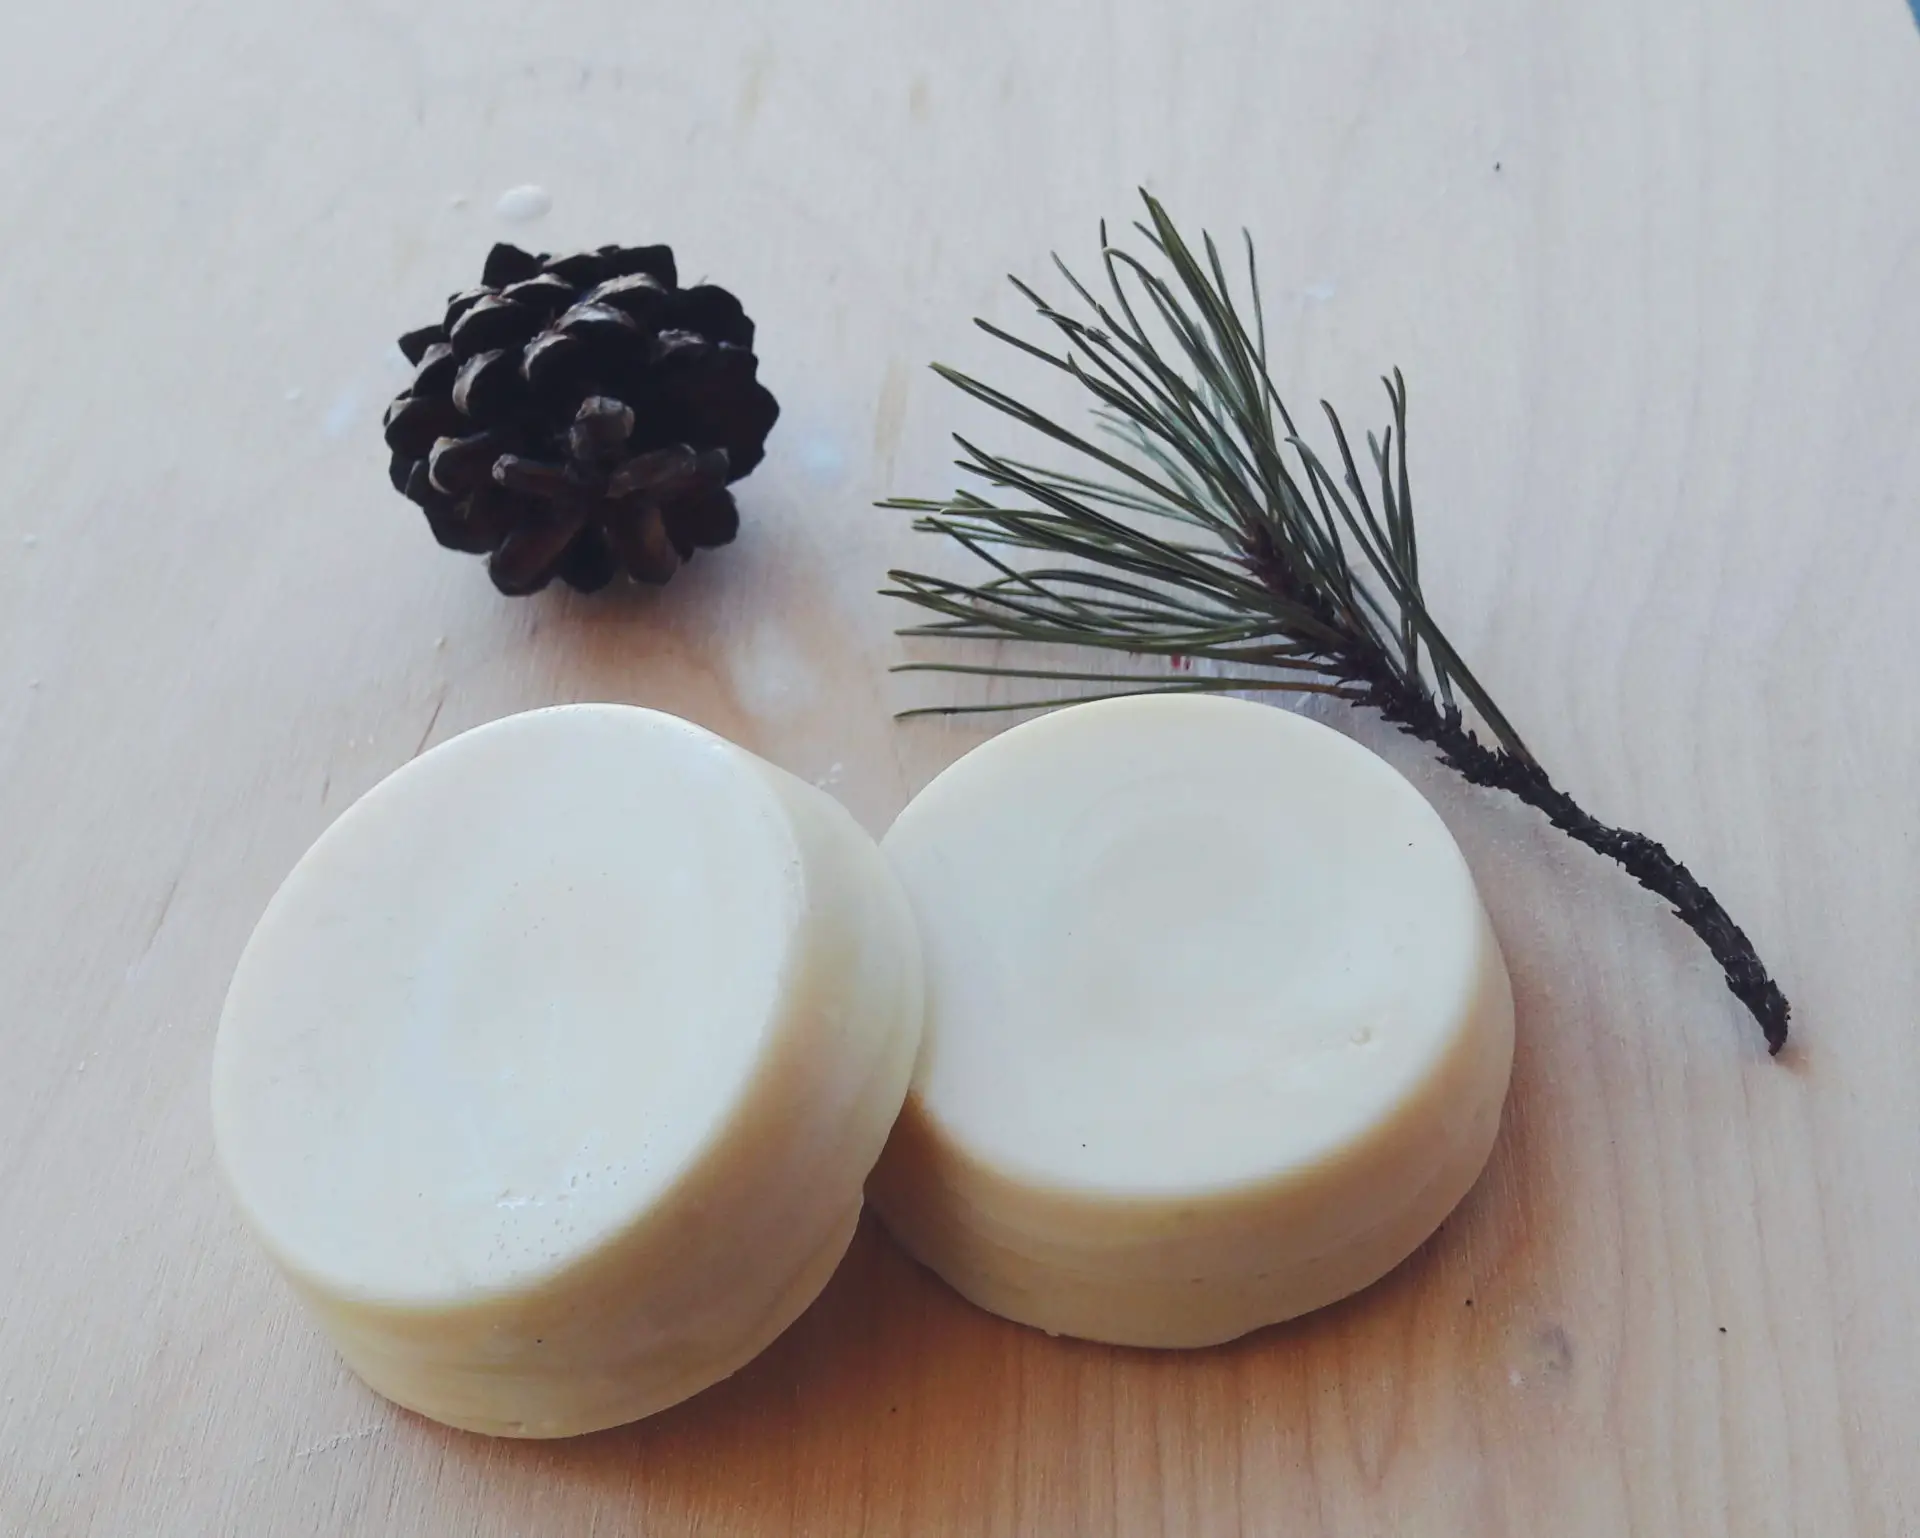 Lotion bar recipe without beeswax